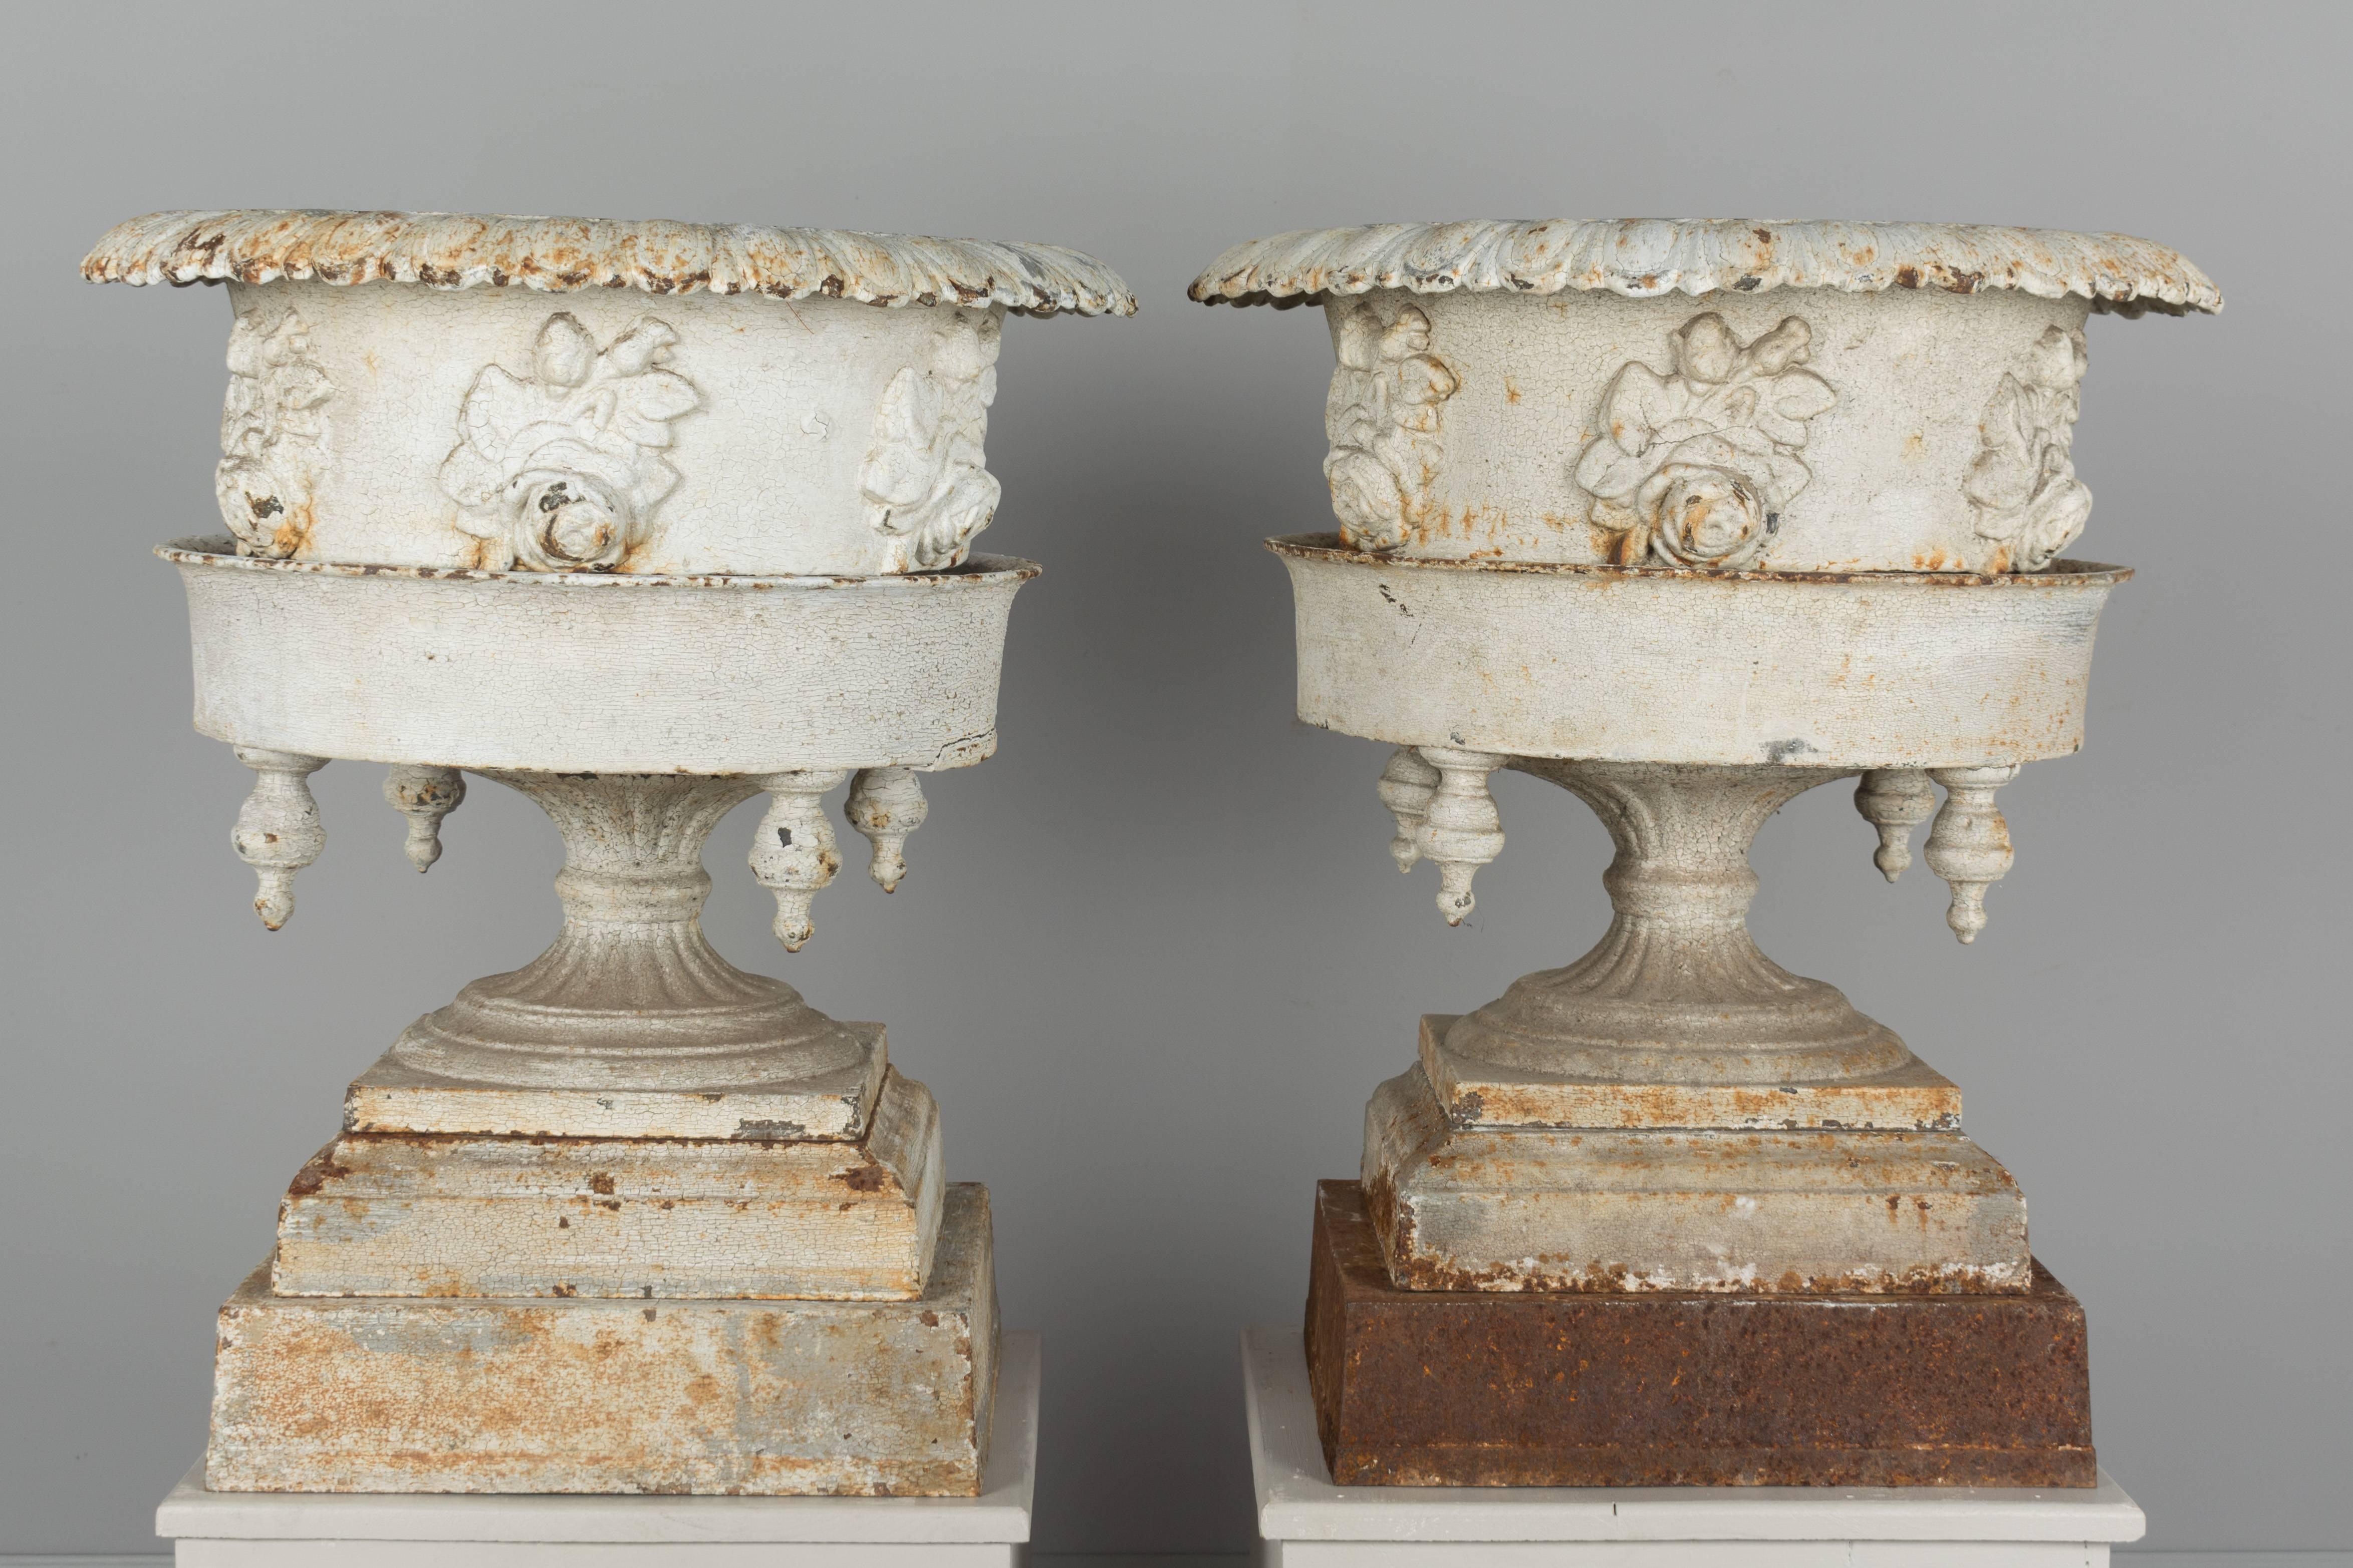 Pair of American cast iron urns with original old white painted patina. Found in northern New York State. These planters have an unusual form with a large decorative urn adorned with roses that sits inside a wider base with four finial details, all